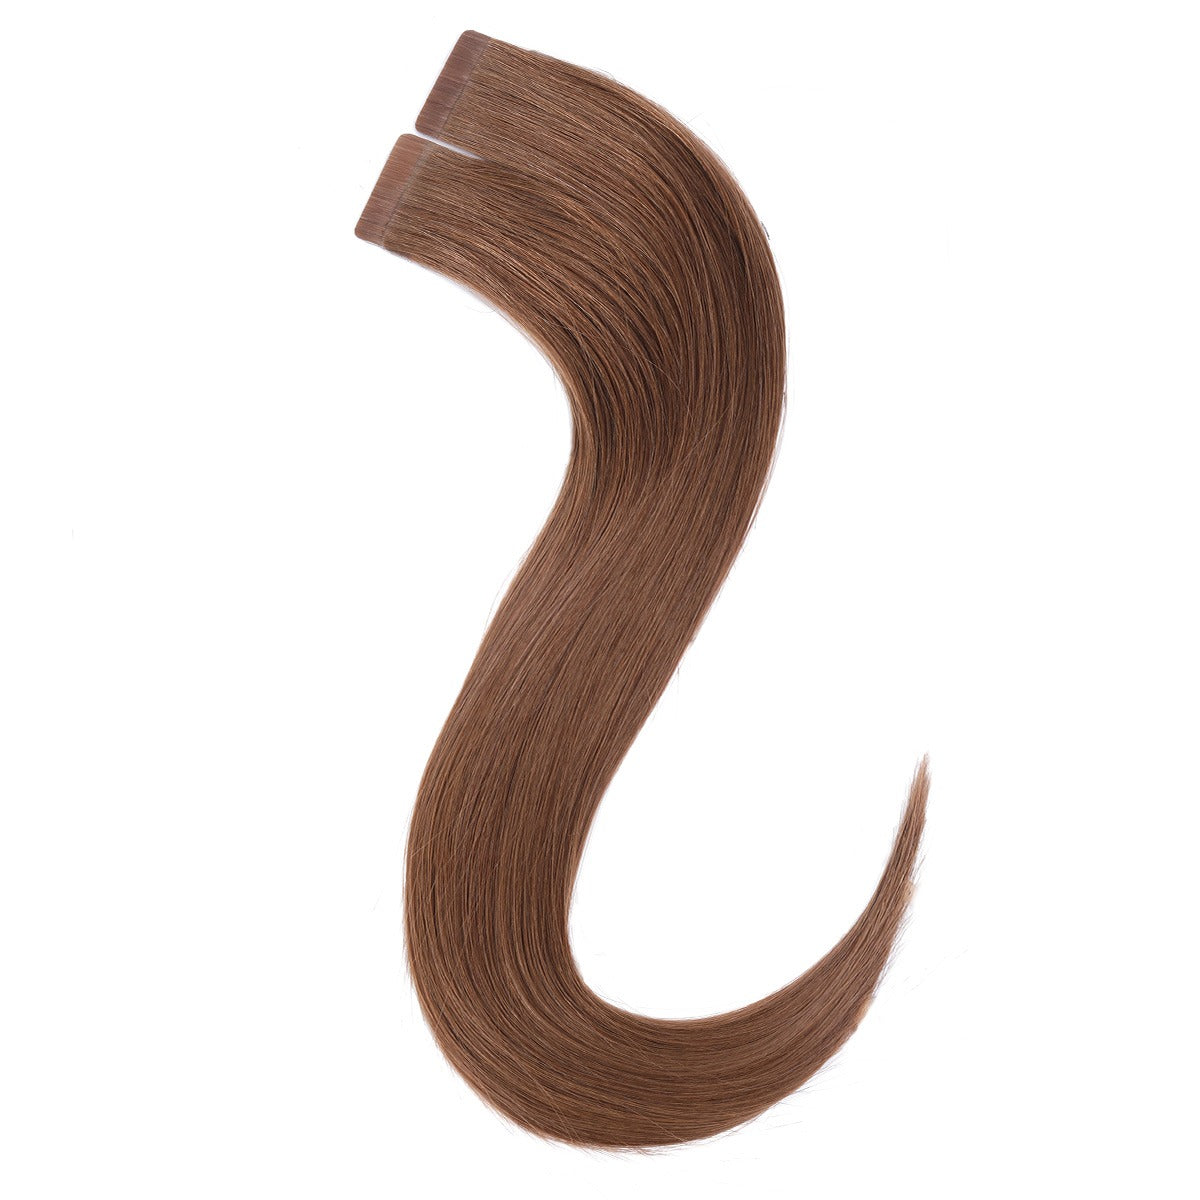 STARDUST Tape-In Color #6 (Chestnut Brown) Hair Extensions